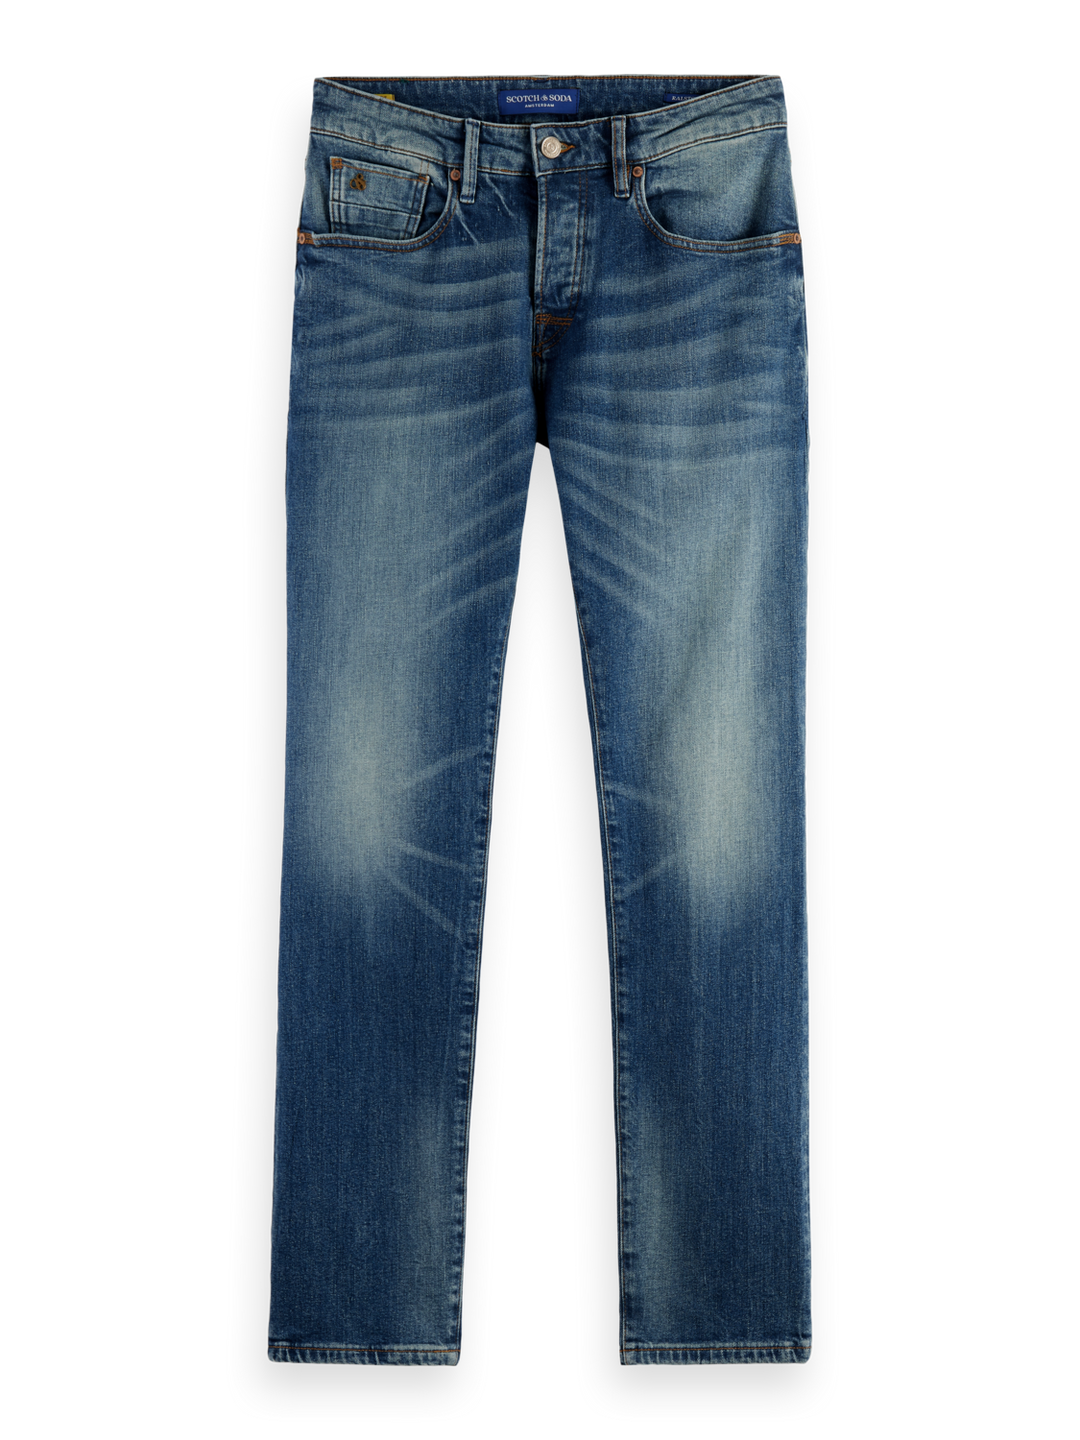 Ralston New Starter Regular Slim Fit Jeans | Buster McGee